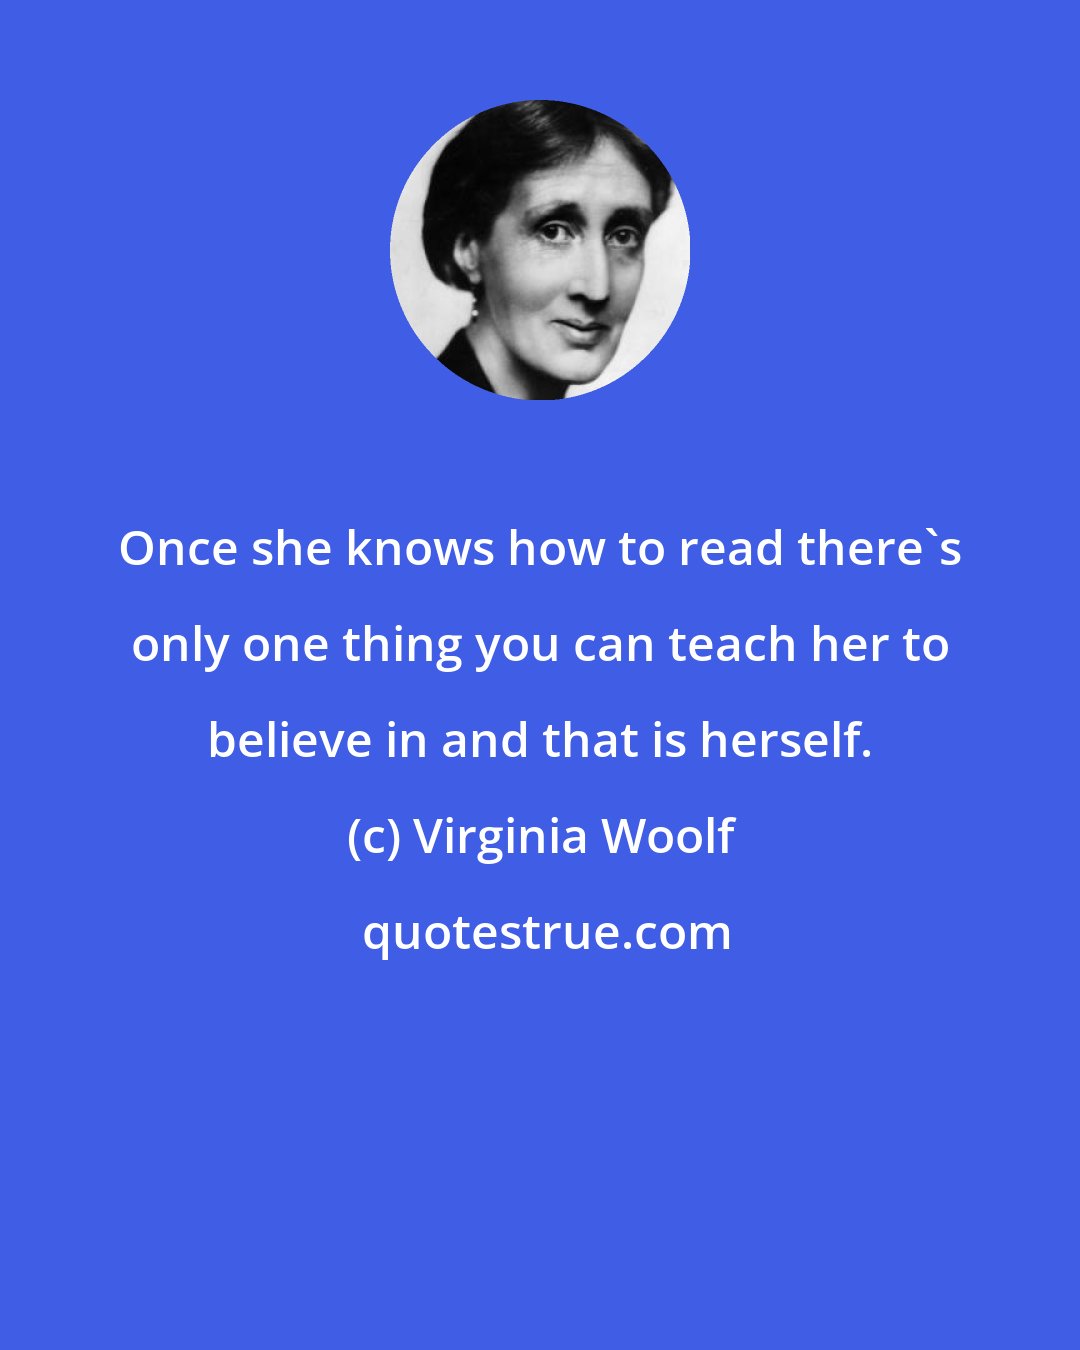 Virginia Woolf: Once she knows how to read there's only one thing you can teach her to believe in and that is herself.